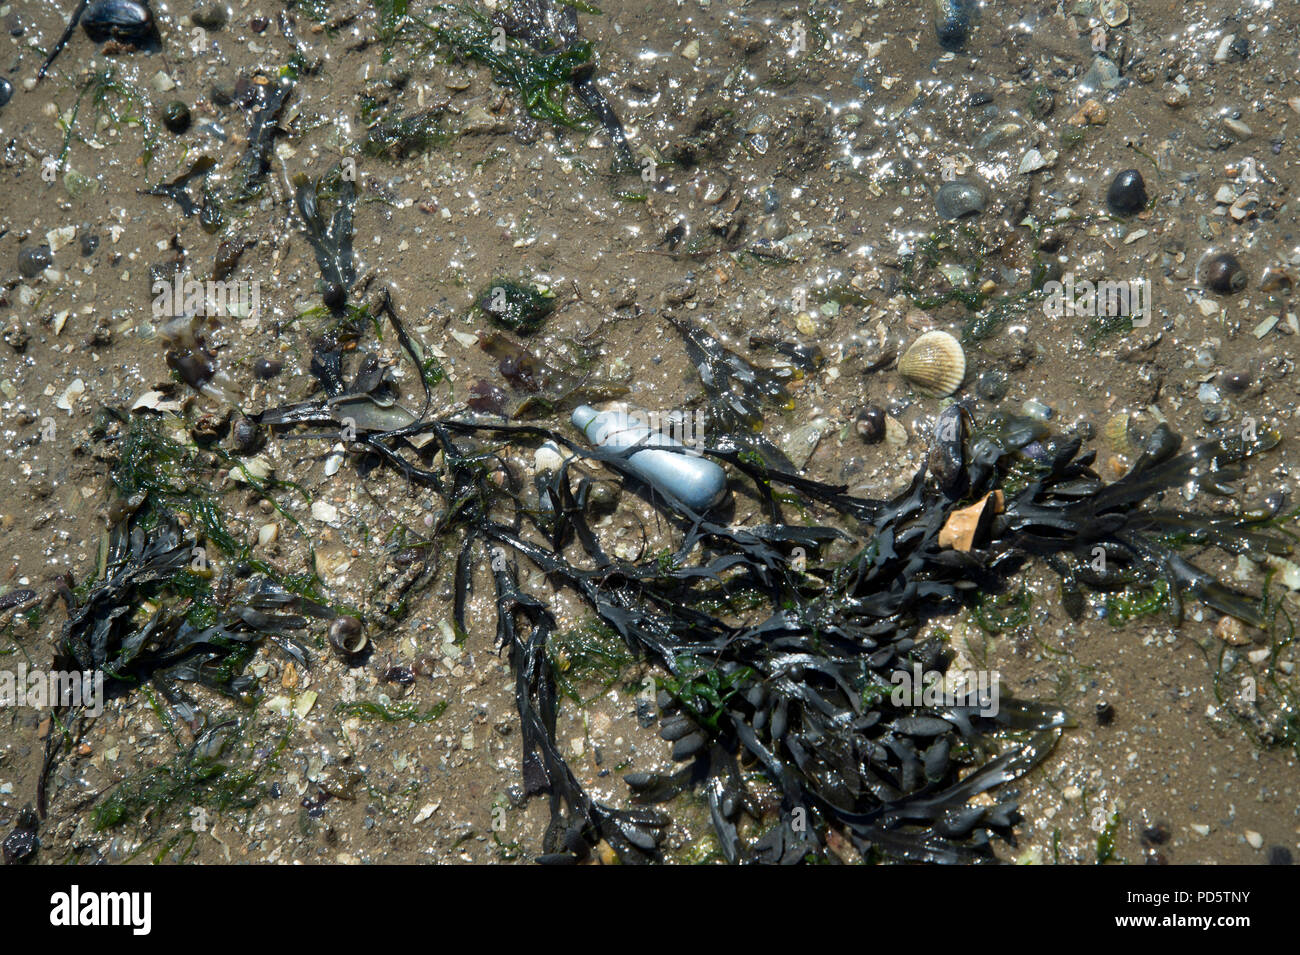 Southend on Sea, Essex. An empty silver canister of nitrous oxide is discarded on the beach Stock Photo